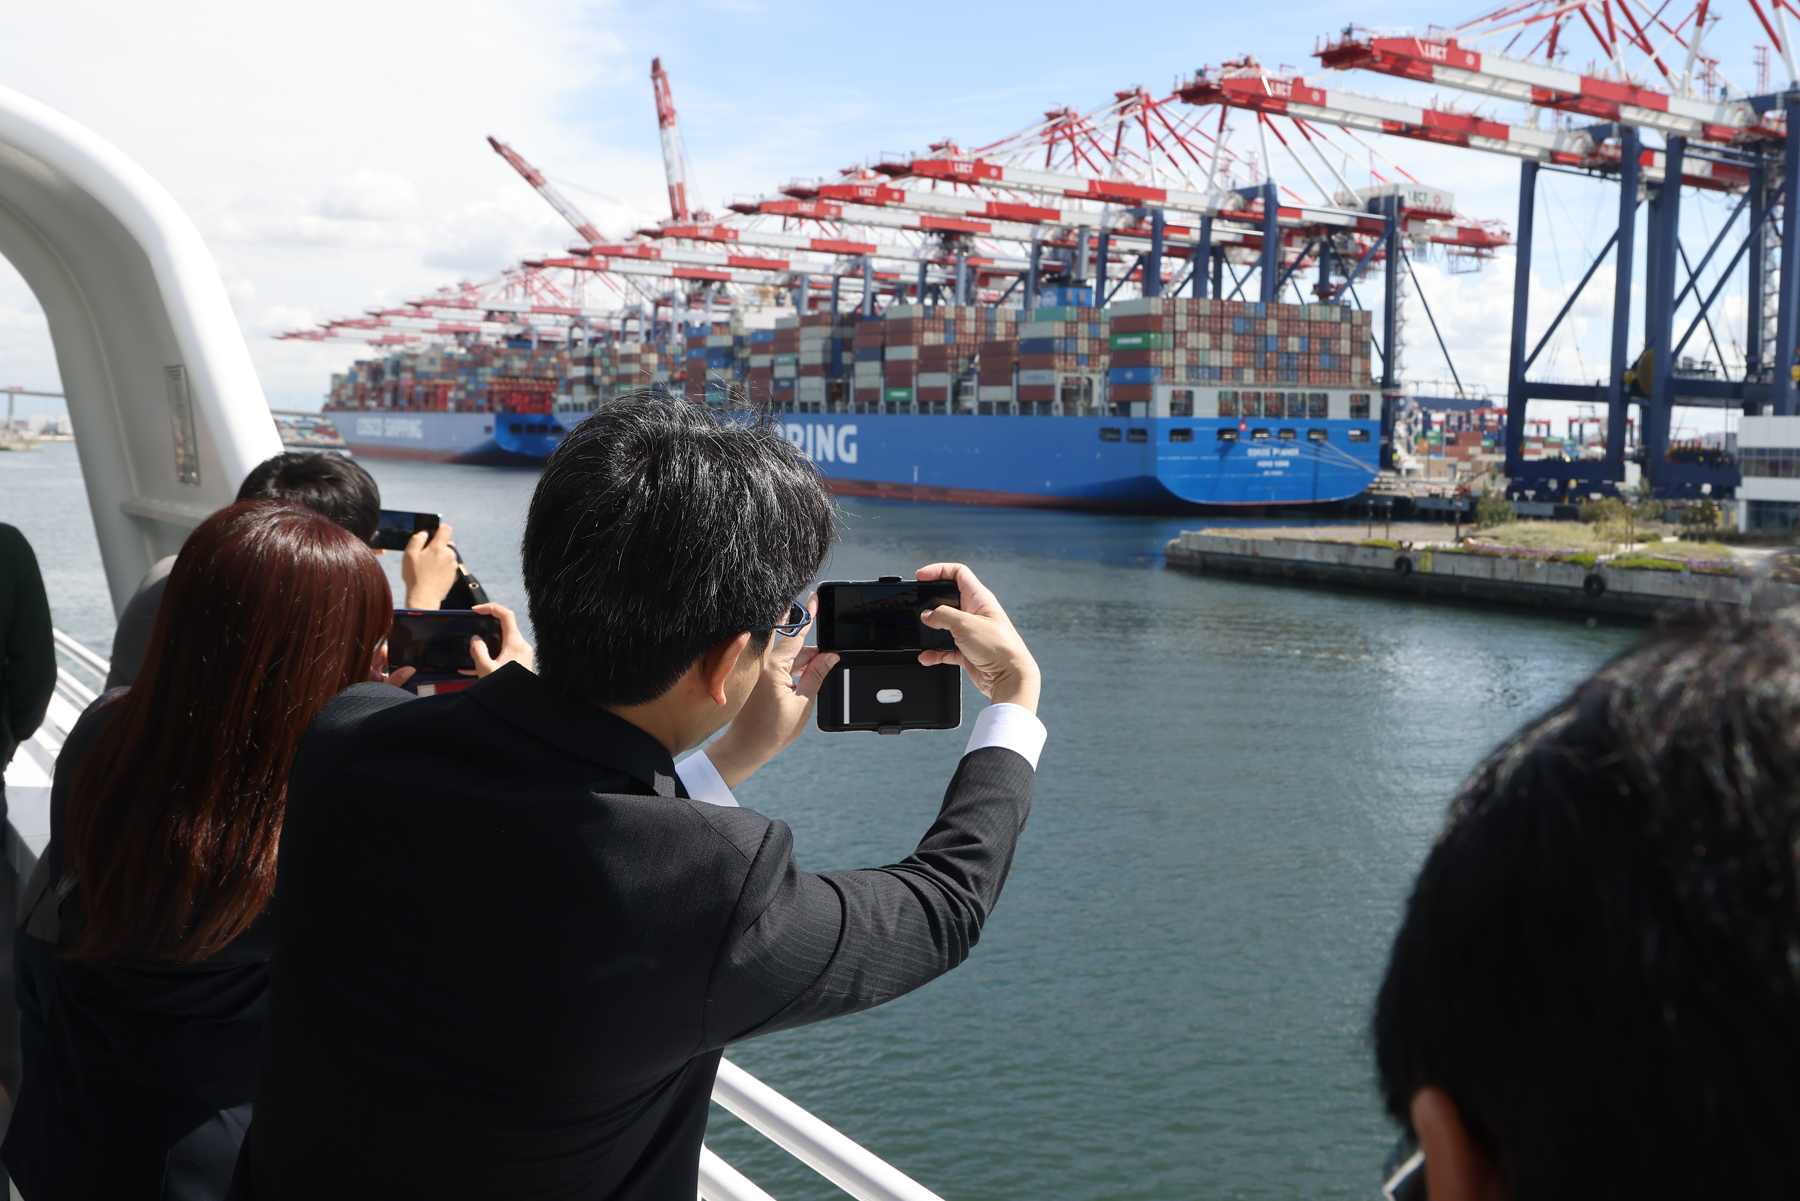 A photo of 3 people taking pictures of large container ship and drayage equipment on the upper deck of a boat